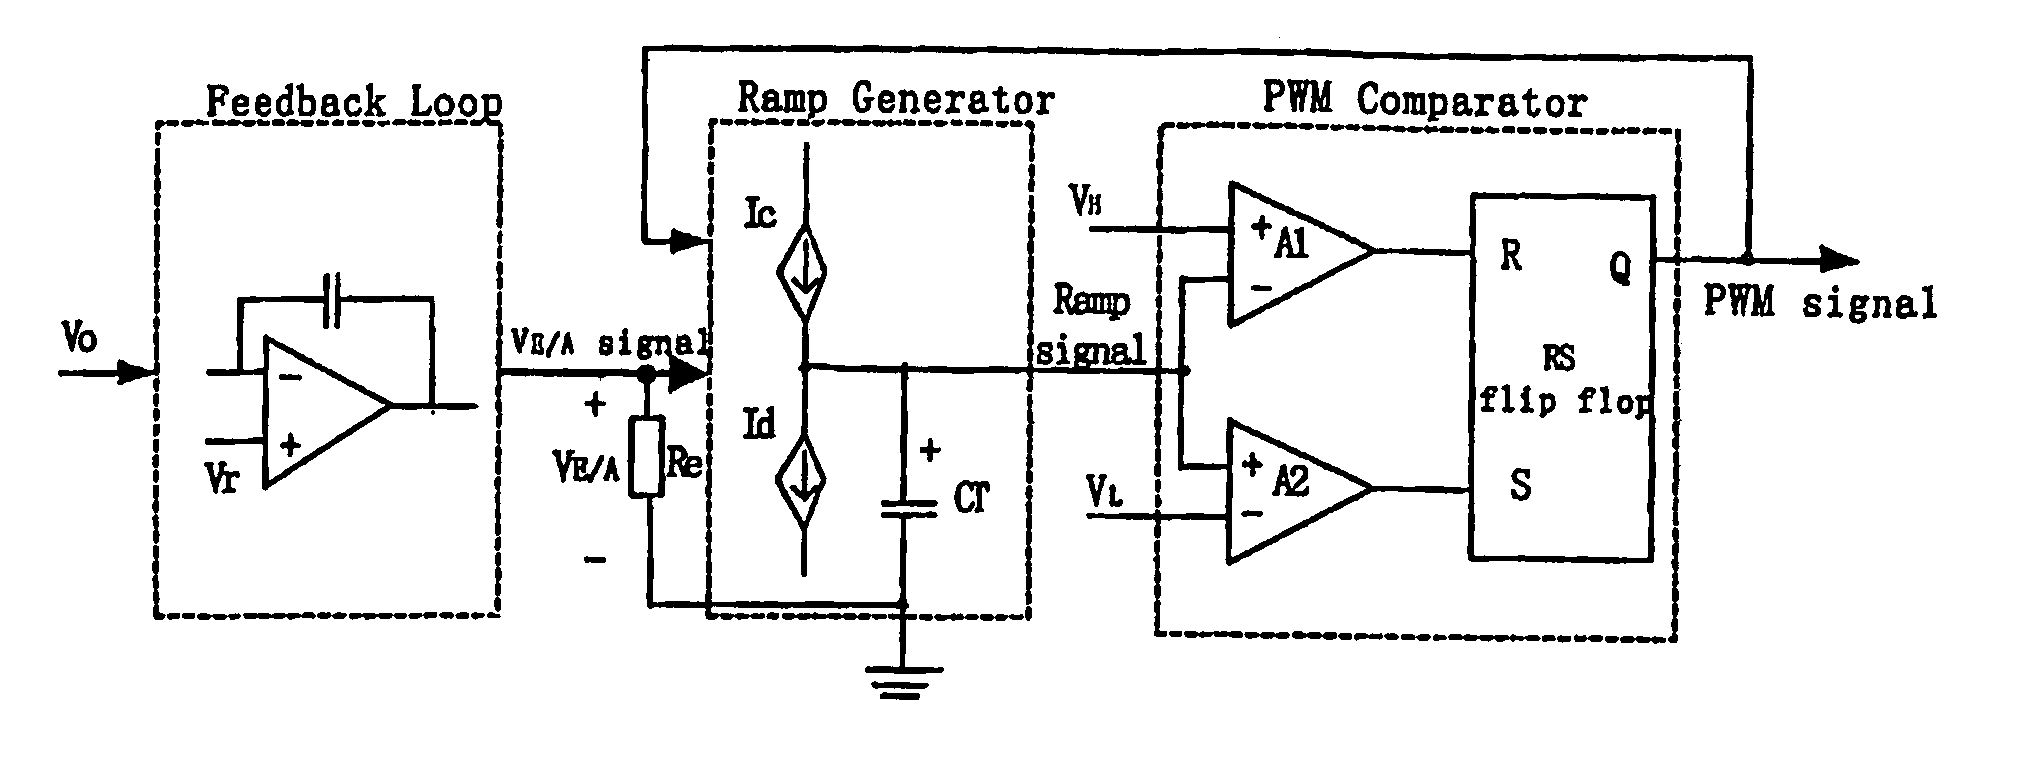 Variable frequency PWM controller circuit